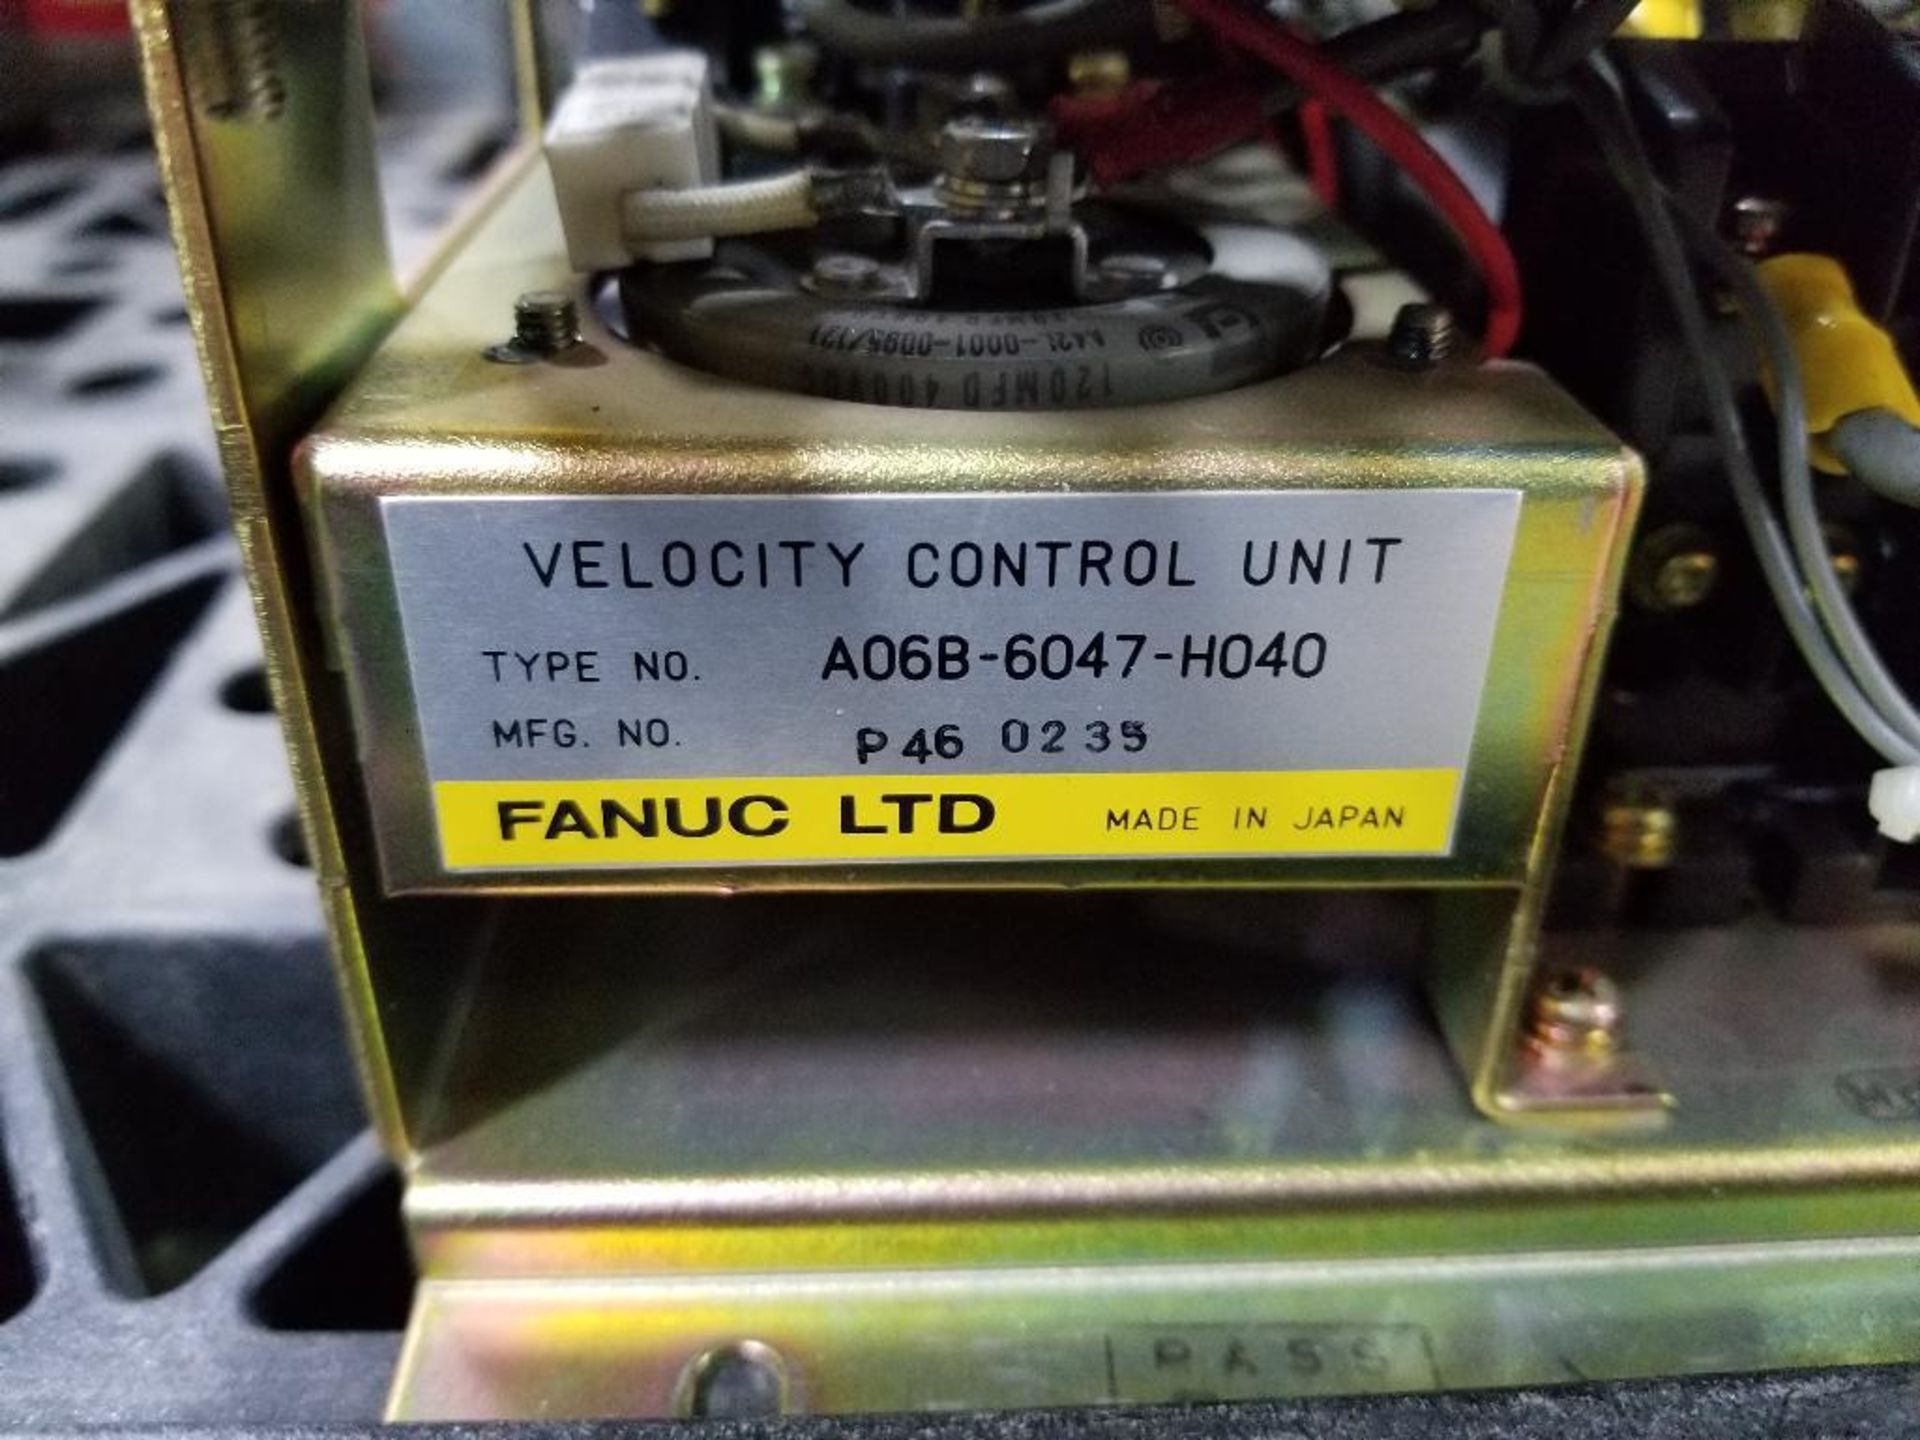 Fanuc velocity control unit. Part number A06B-6047-H040. - Image 3 of 3